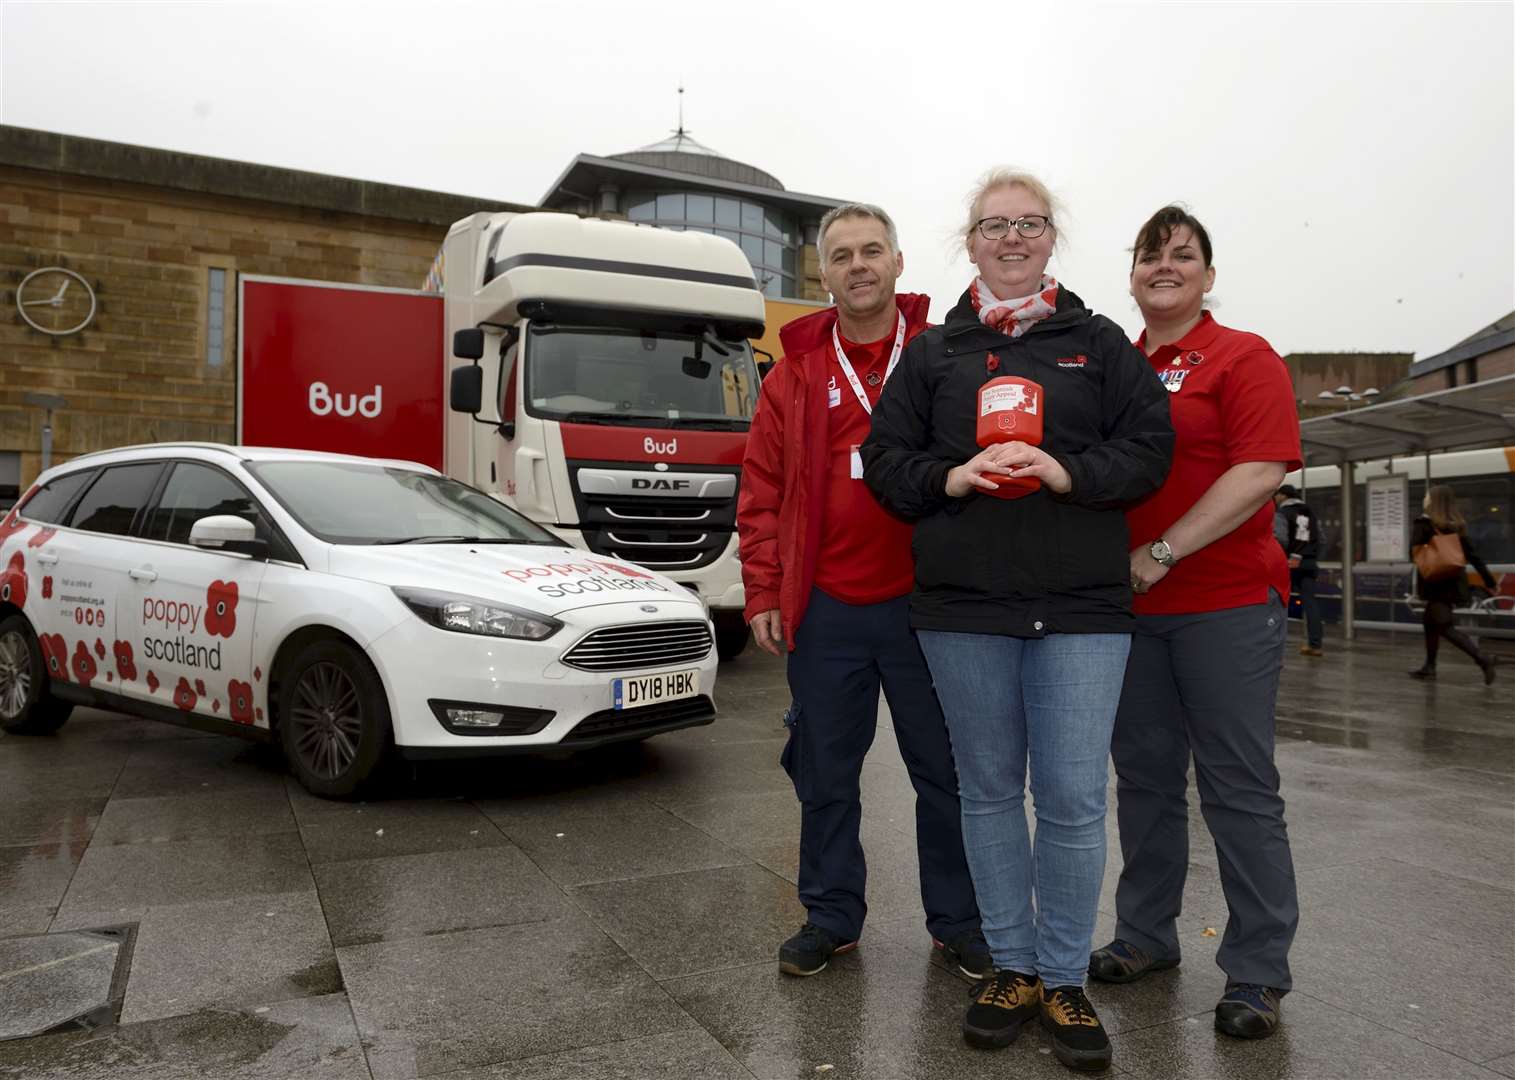 Members of the Bud crew Colin Telfer, Francis Beveridge and Laura O'Neil welcomed visitors to the lorry in Falcon Square. Picture: James MacKenzie